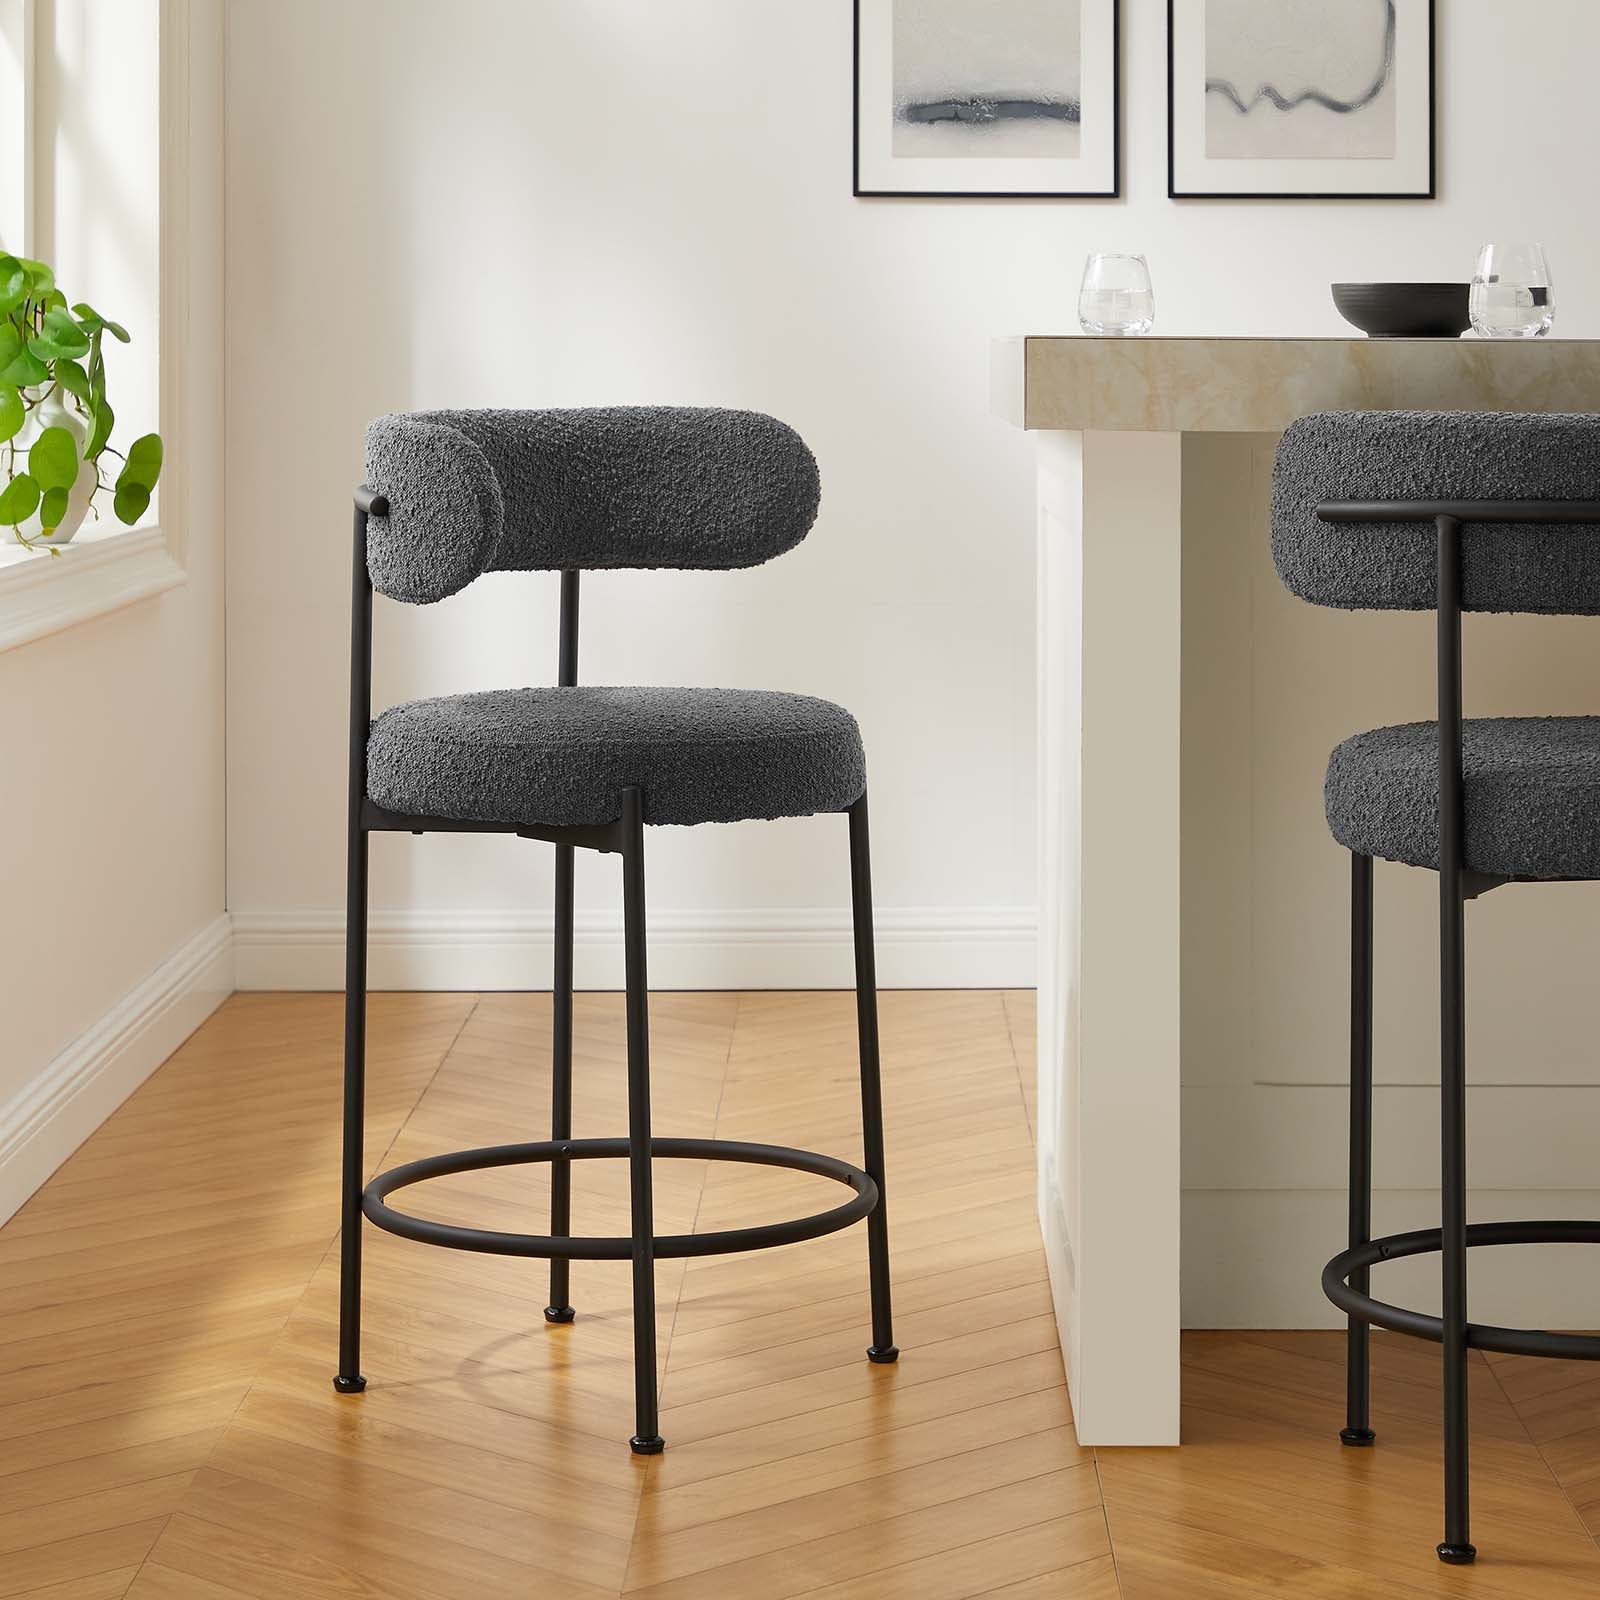 Albie Boucle Fabric Counter Stools - Set of 2 - East Shore Modern Home Furnishings